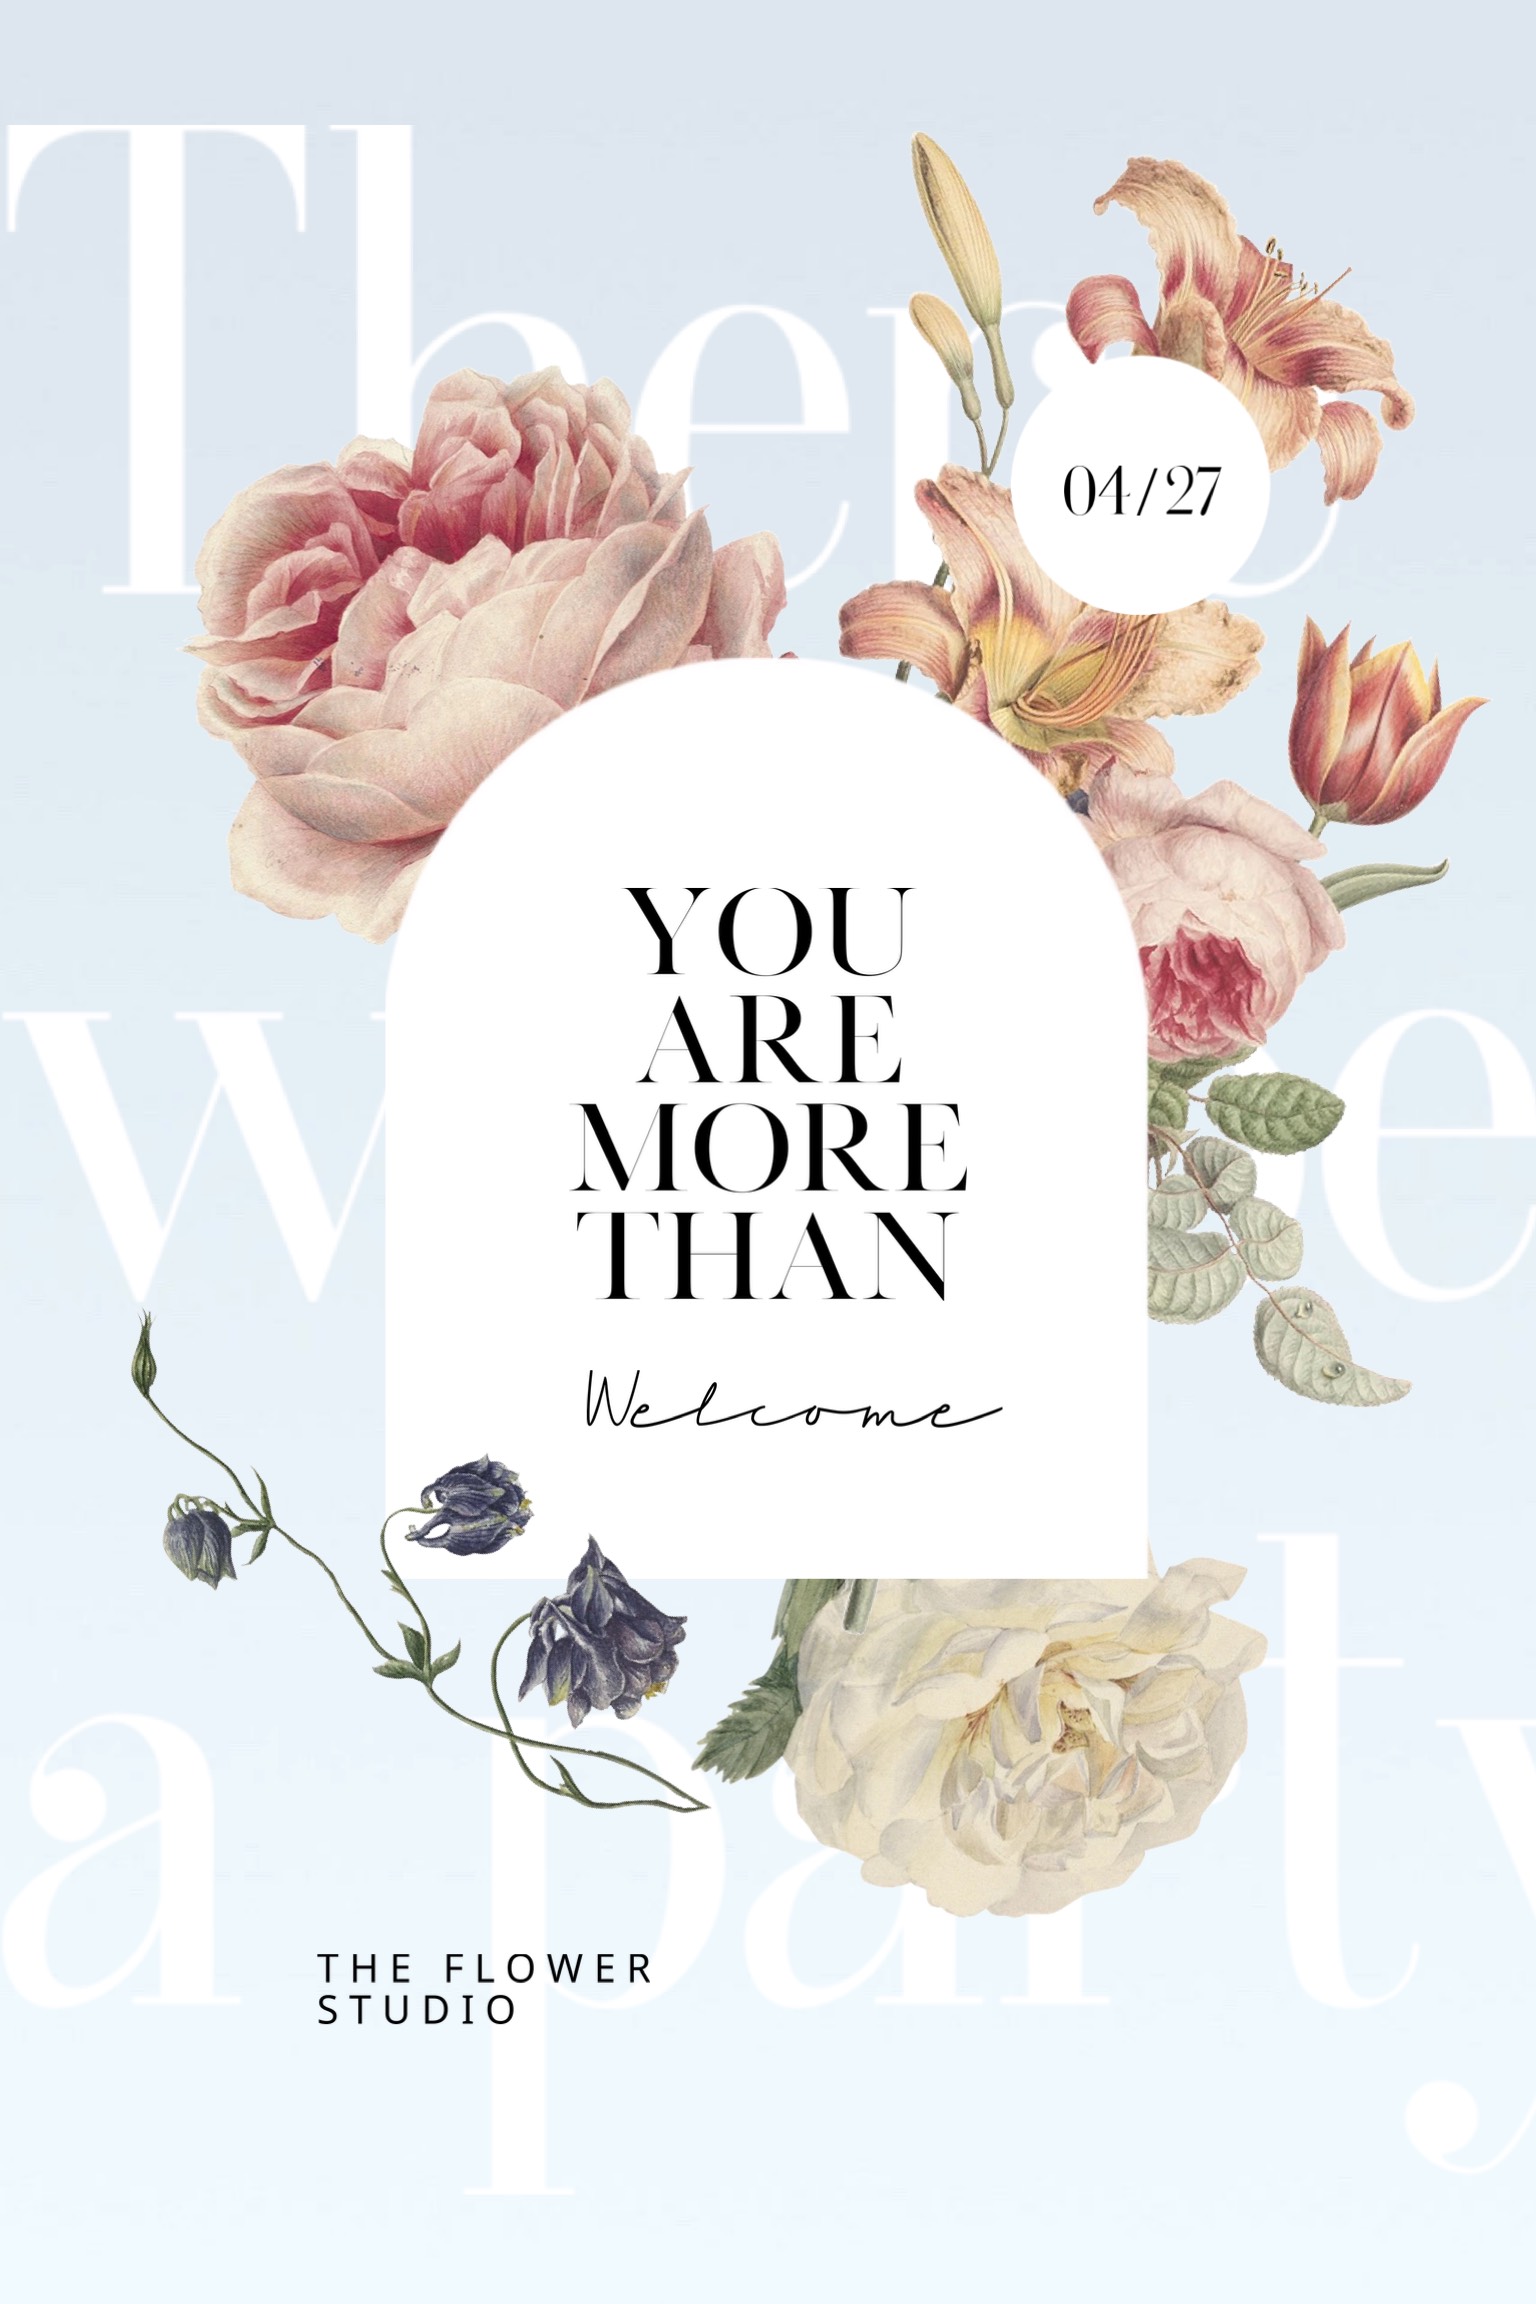 You are more than welcome flowers invitation template